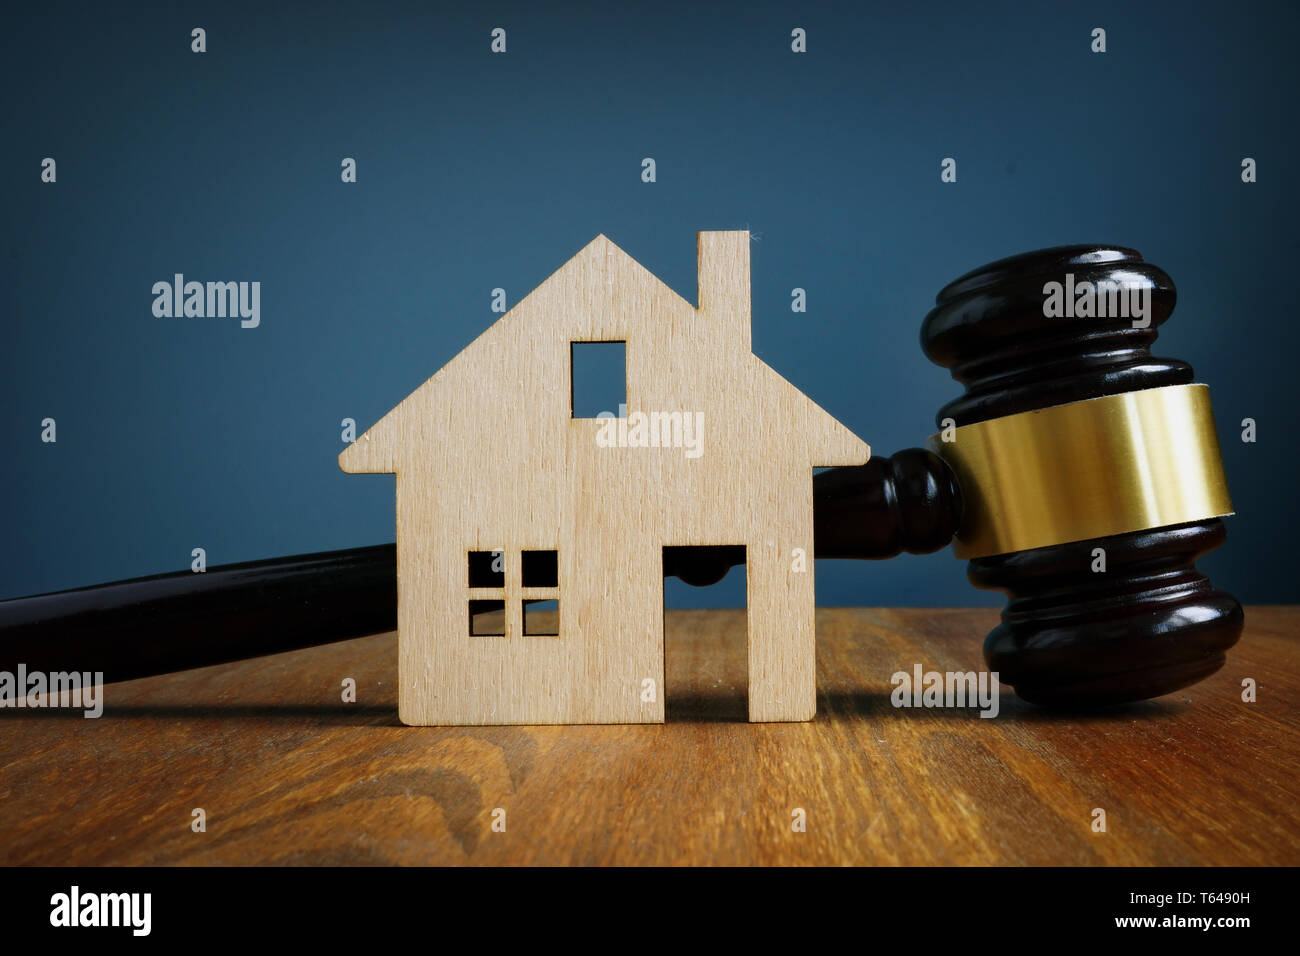 Model of house and gavel. Real estate law concept. Stock Photo